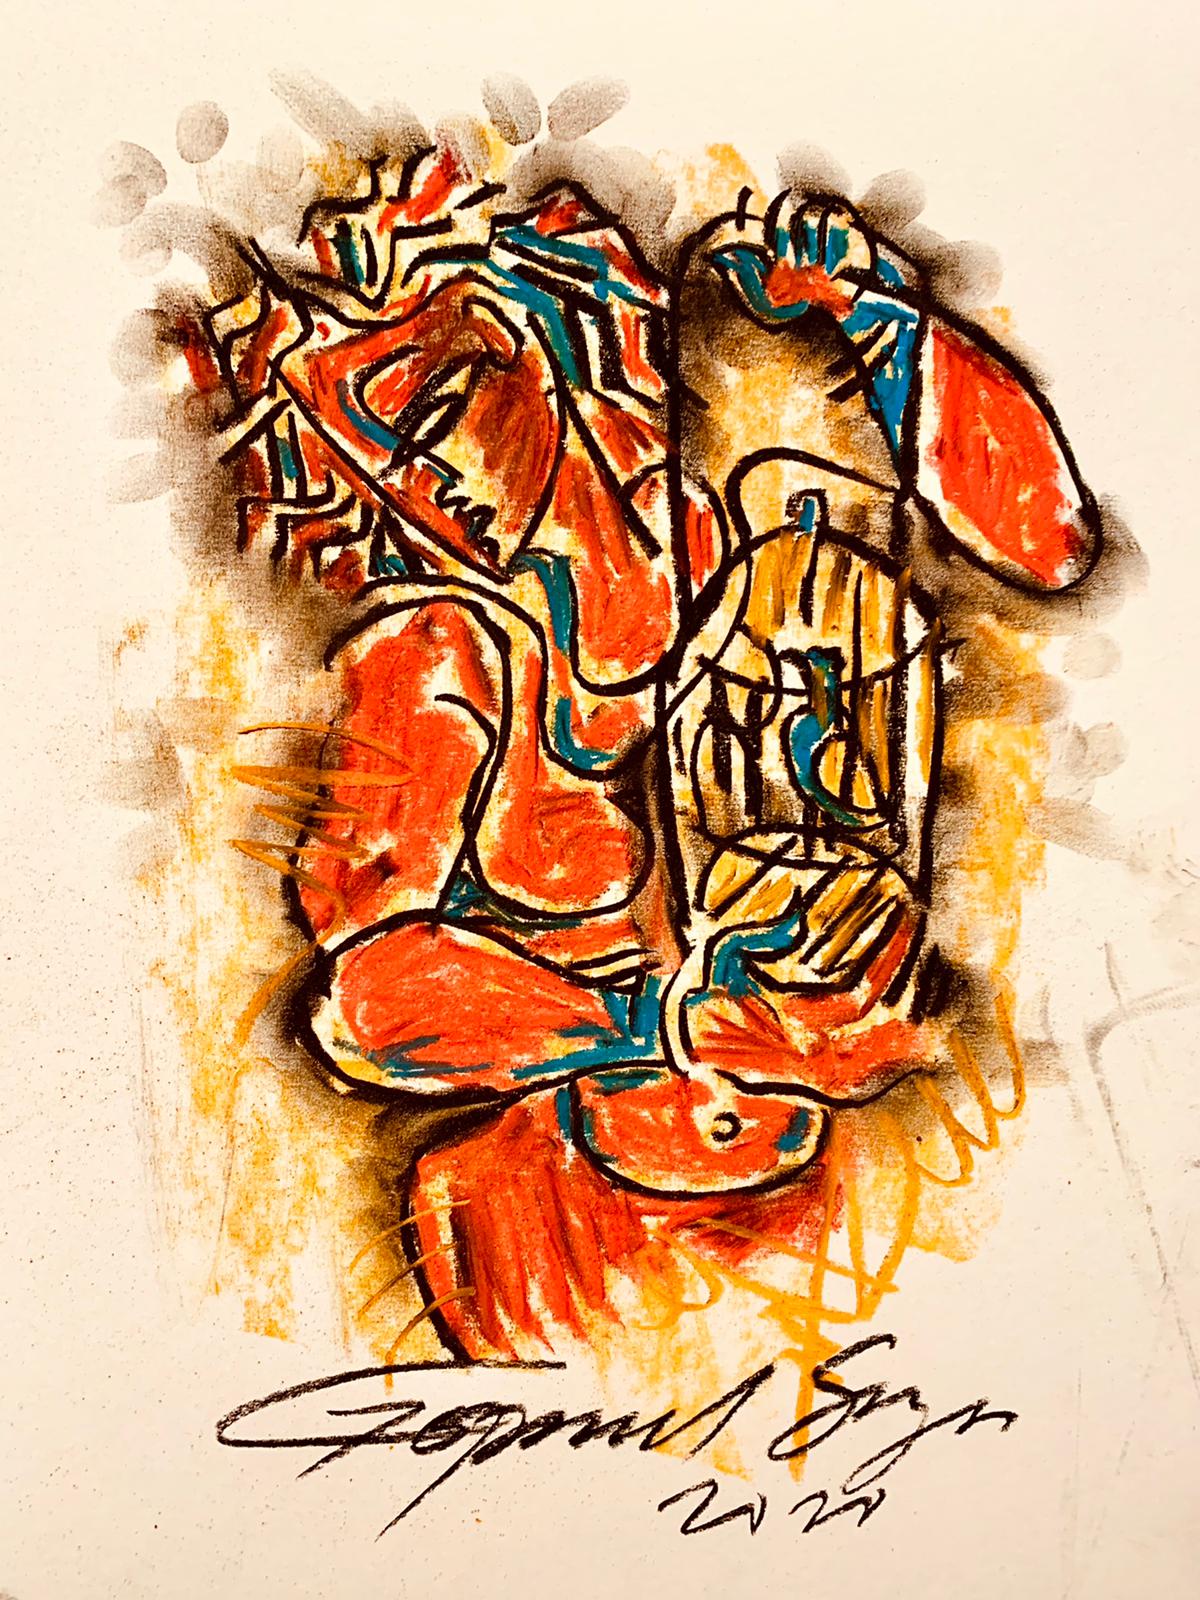 Buy Music Painting the original Matted Charcoal and Pastel on Paper artwork by Indian-American artist Gopaal Seyn | RedBlueArts.com